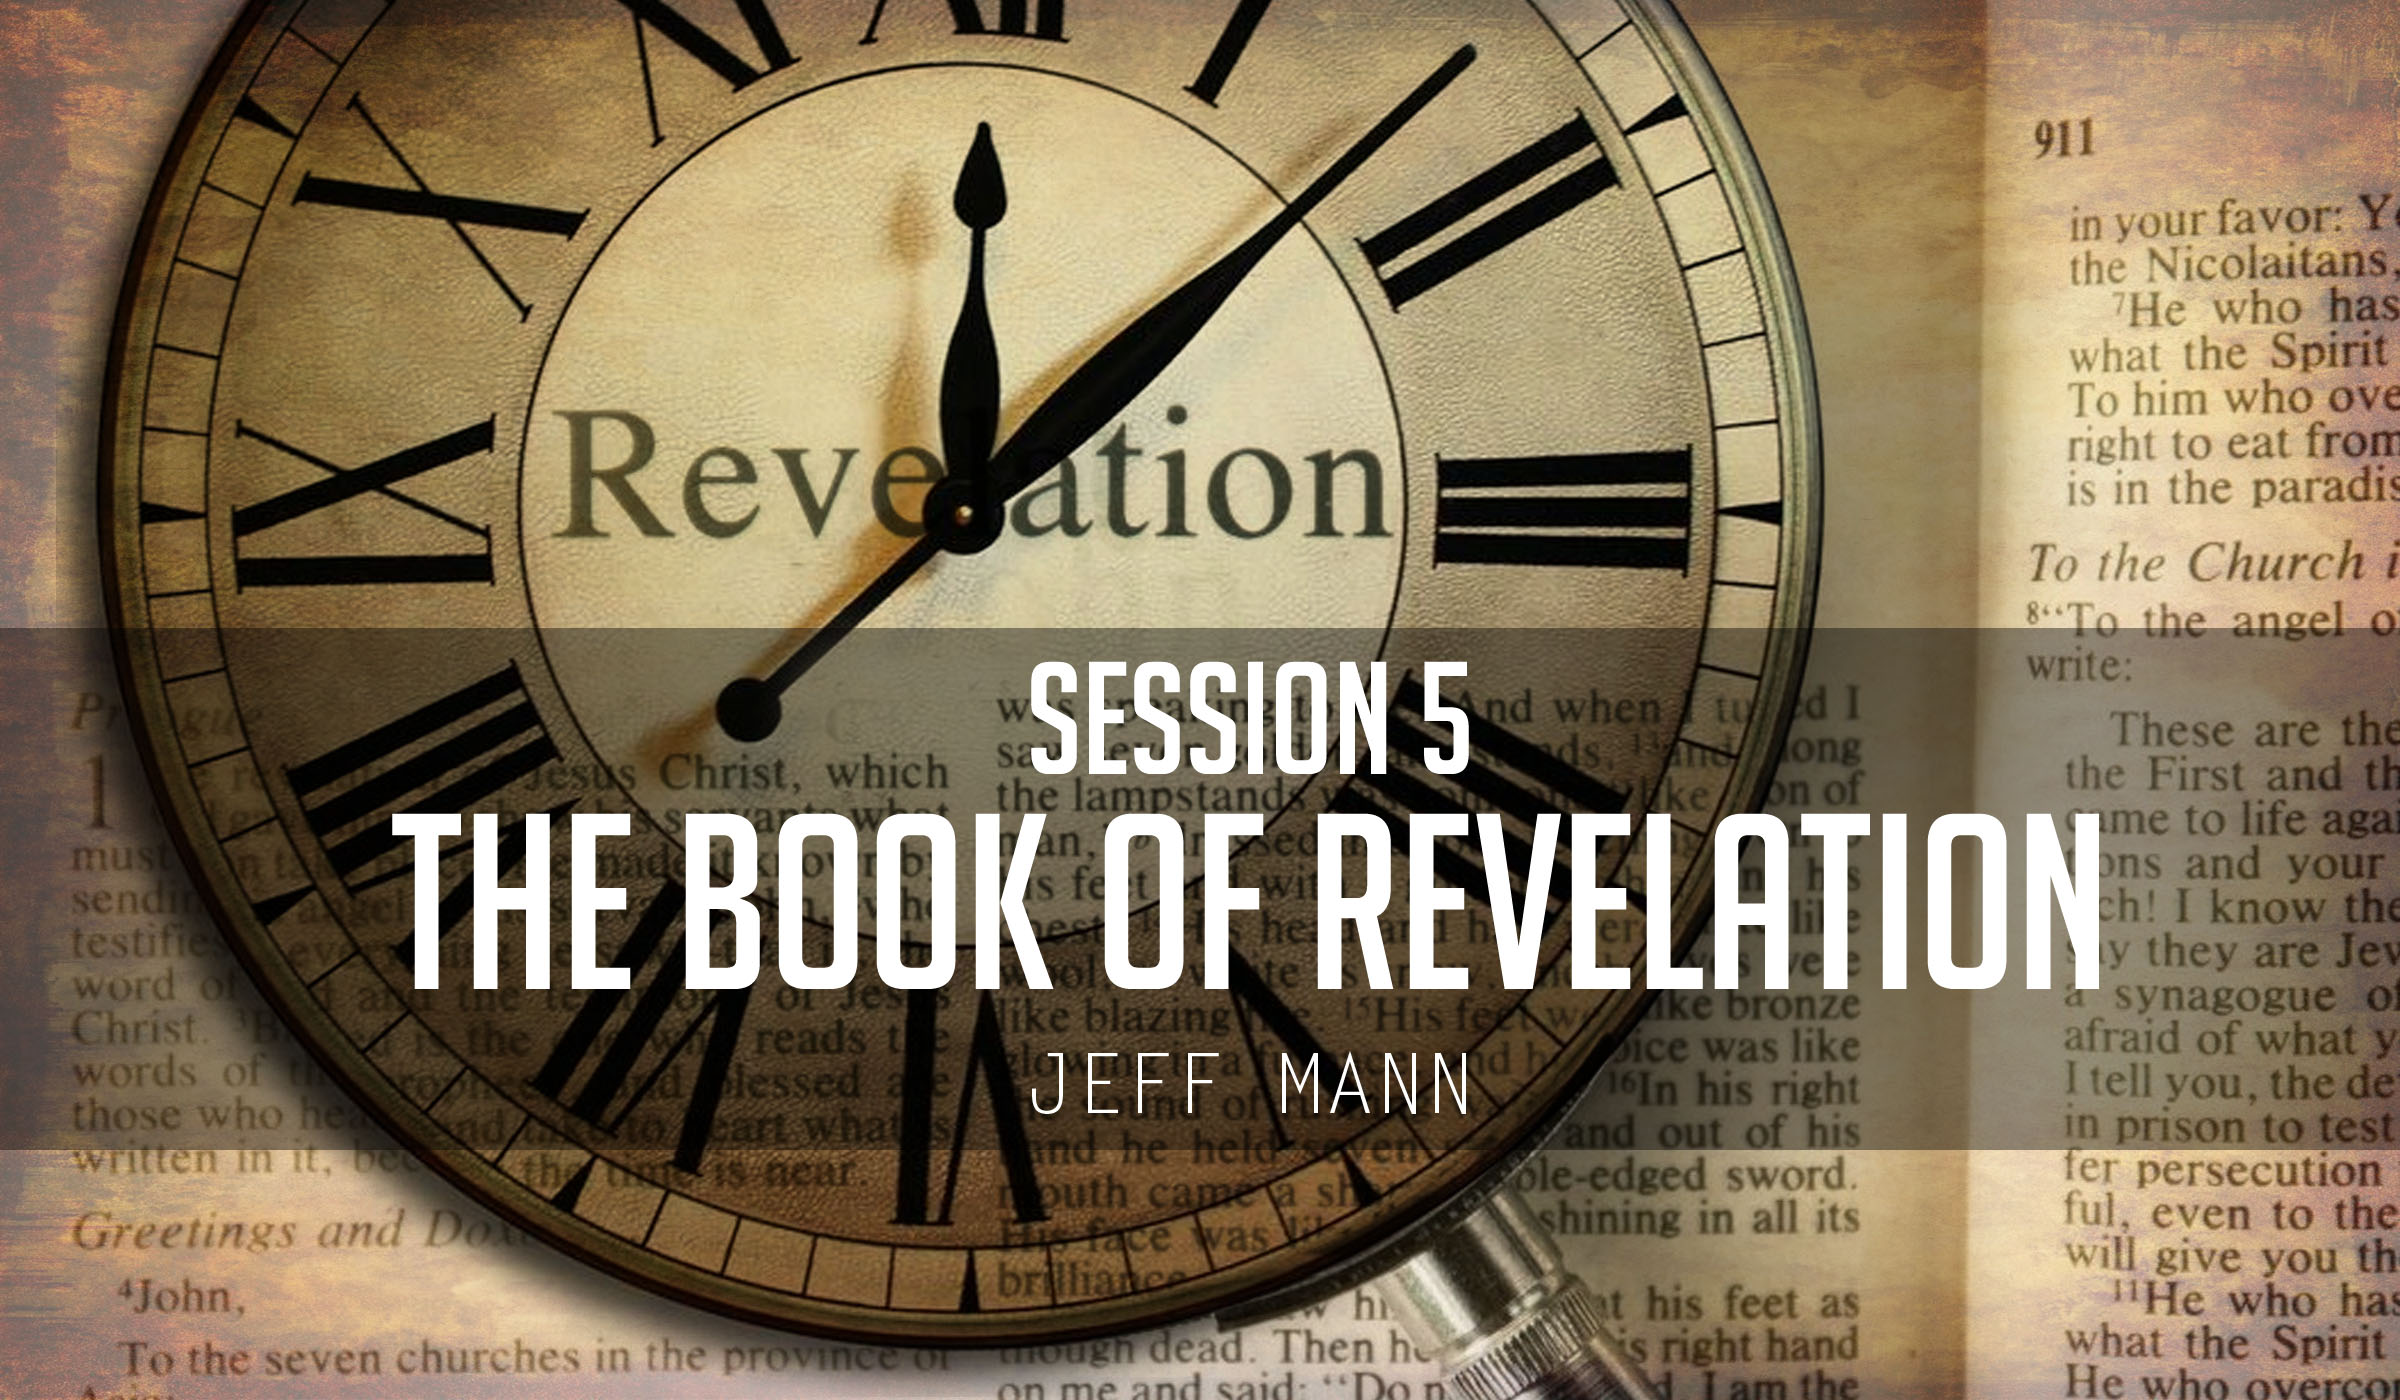 The Book of Revelation Session 5